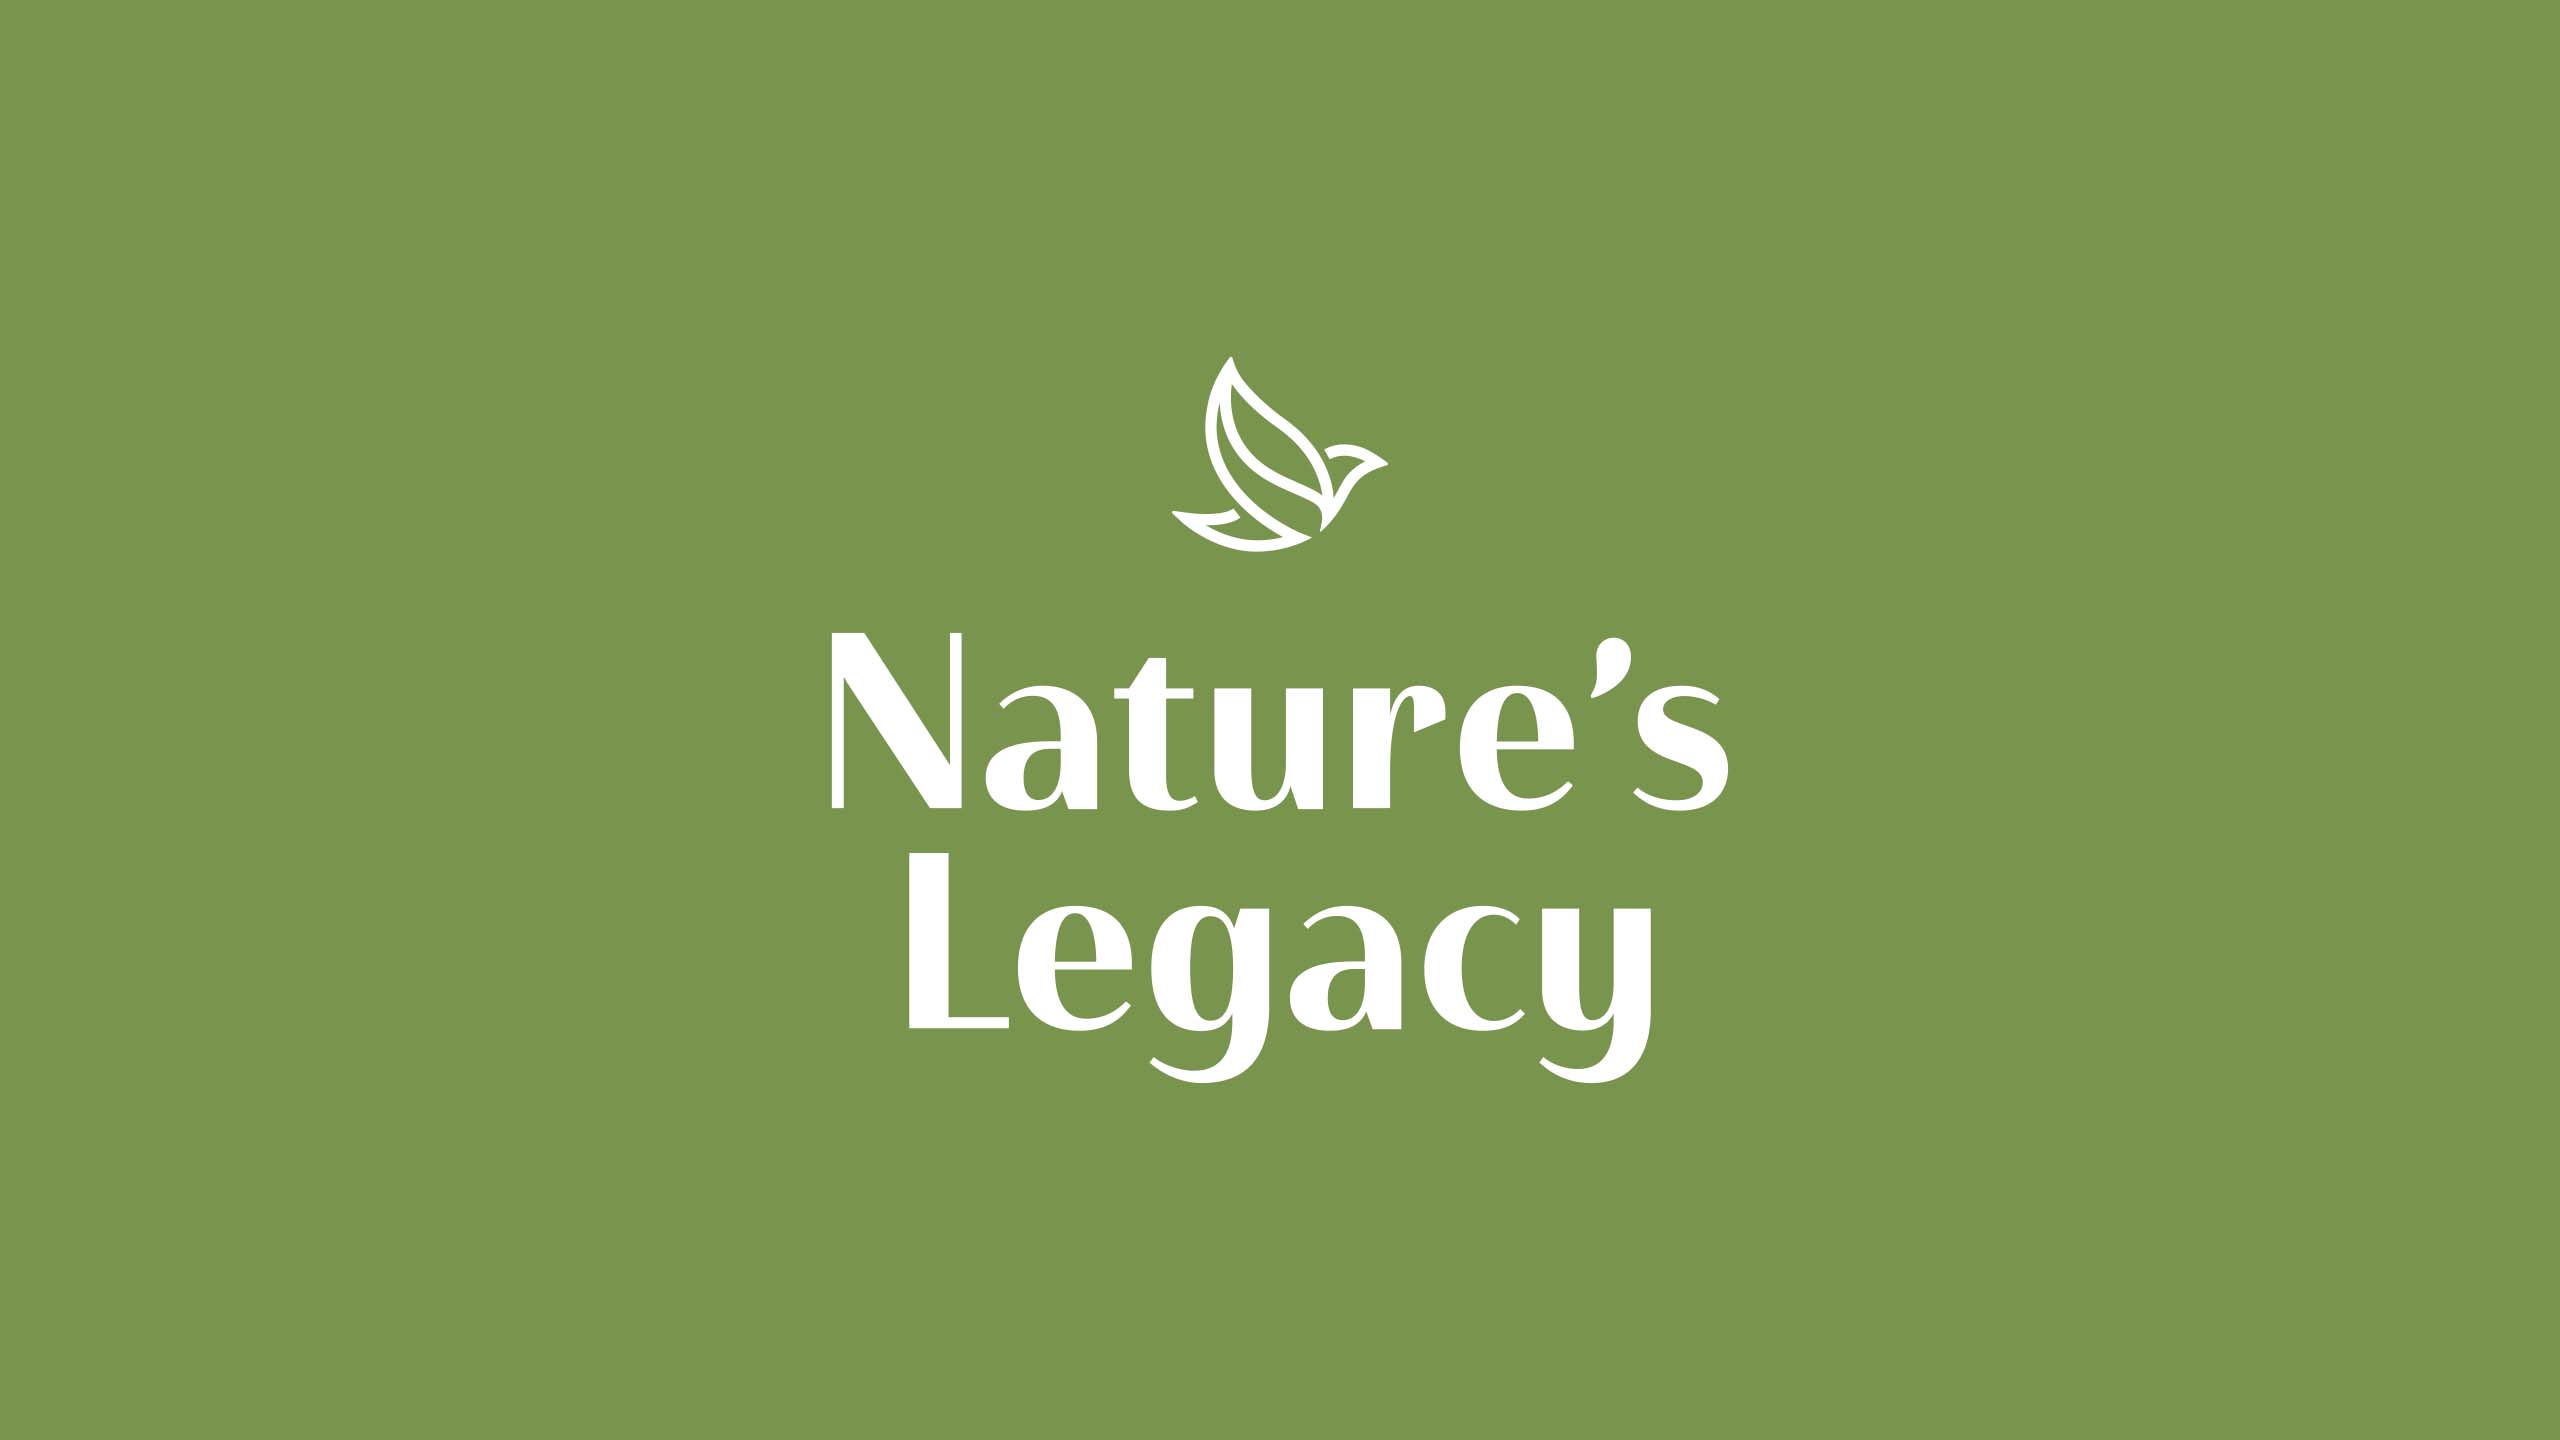 Green and white logo and icon design for home and furniture brand Nature's Legacy